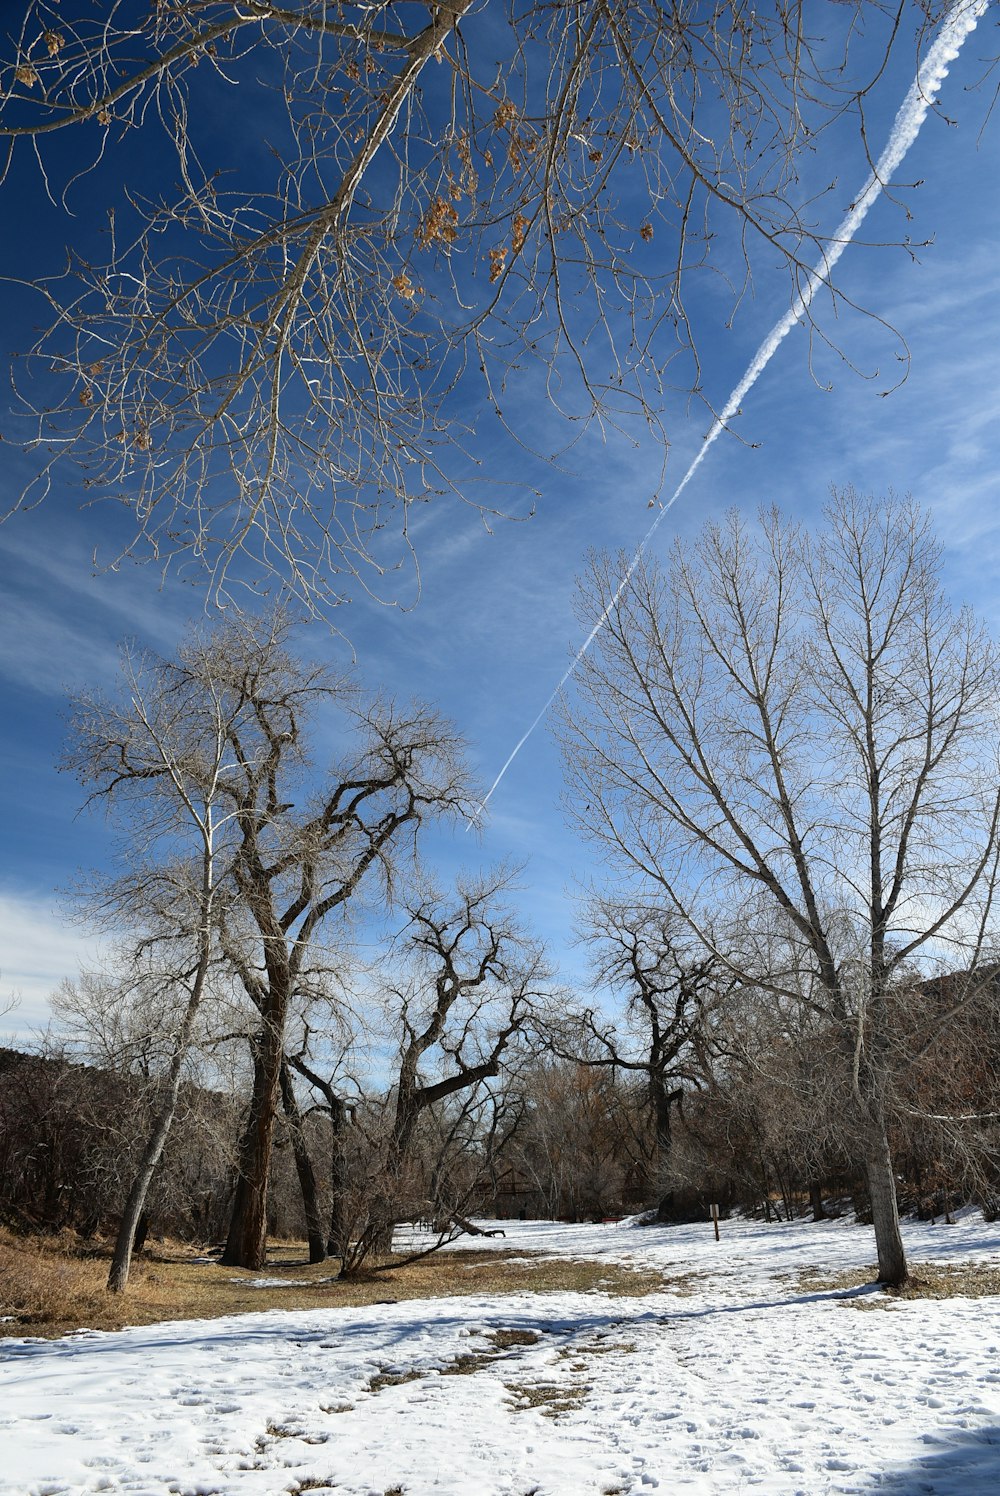 a plane flying in the sky over a snow covered field